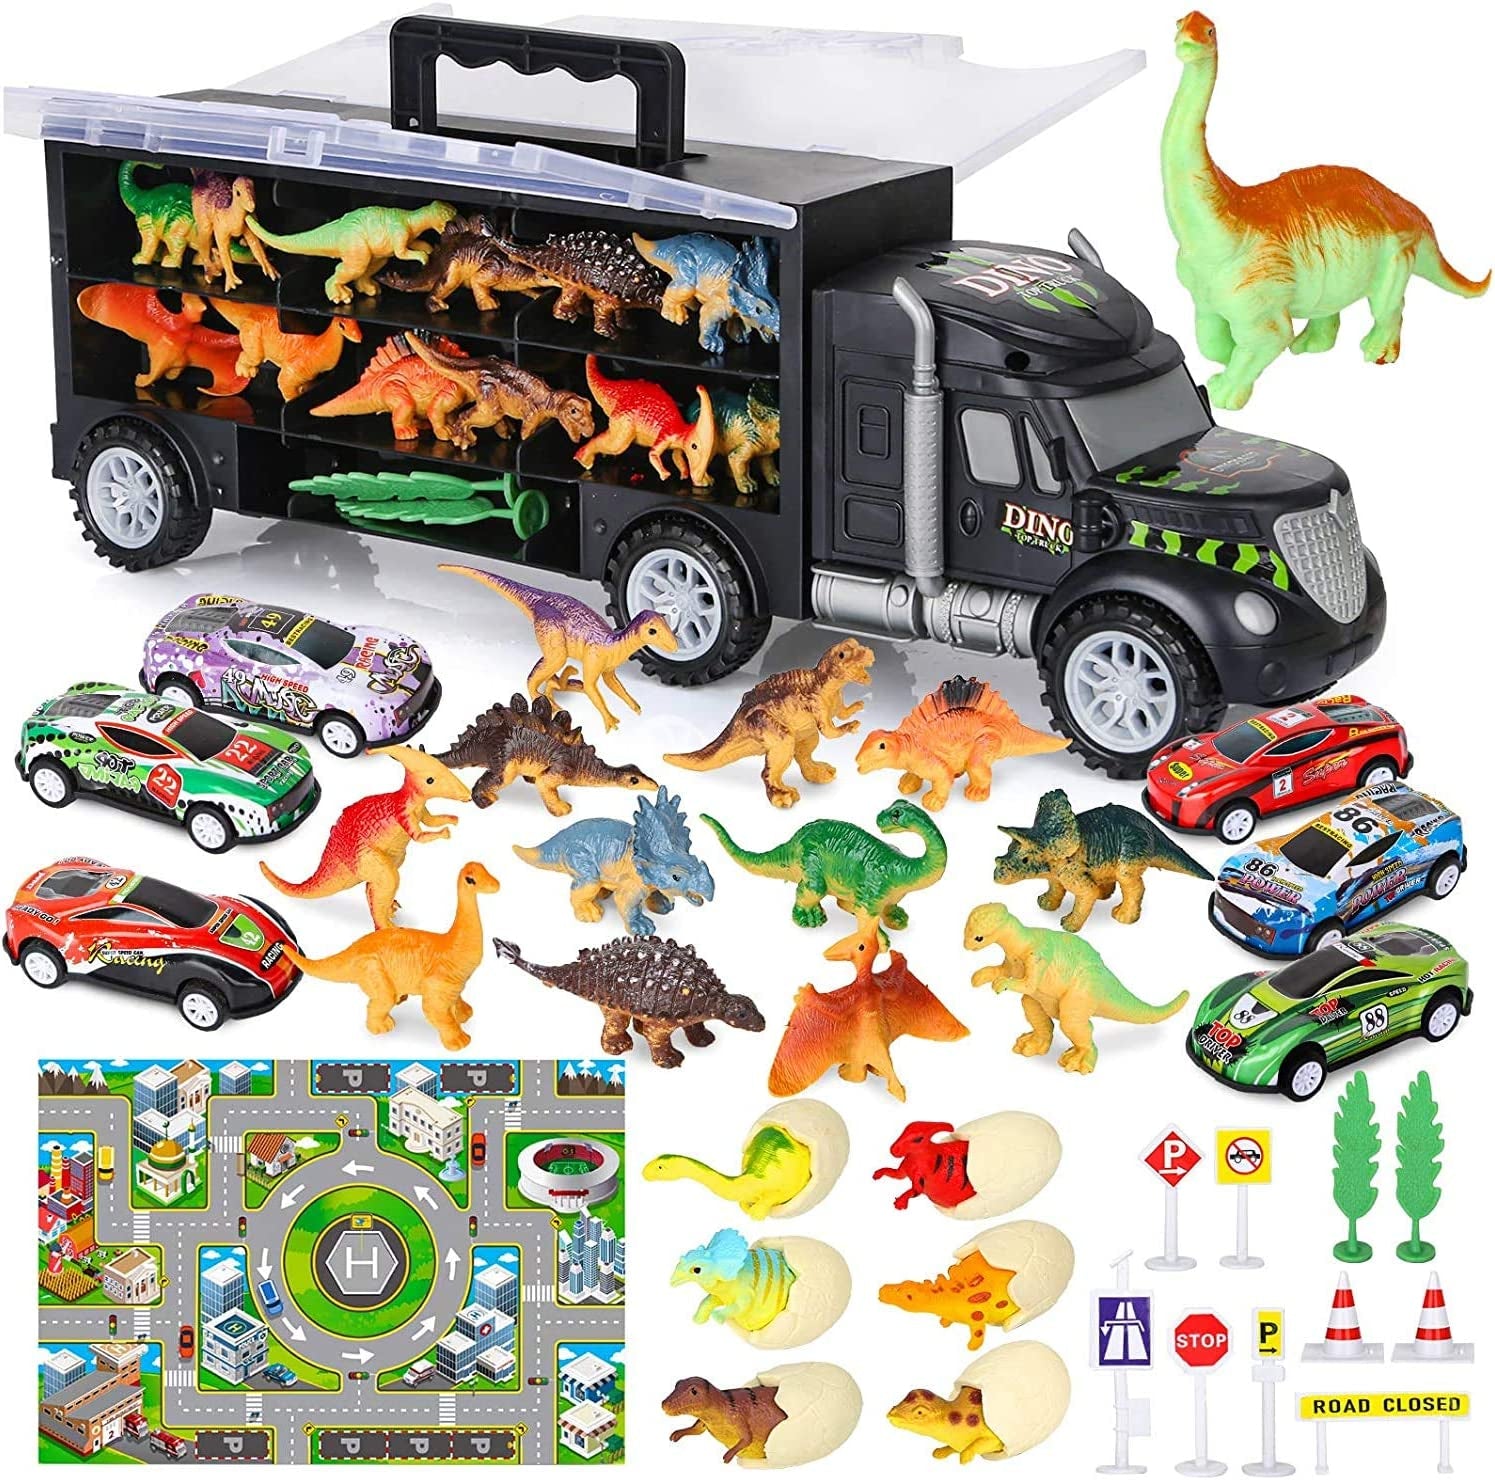 Dinosaur Truck Toy Car Transporter Carrier Set Include Dinosaur Figures & Egg Mini Racing Car with Play Mat, Road Signs for Children 37PCS